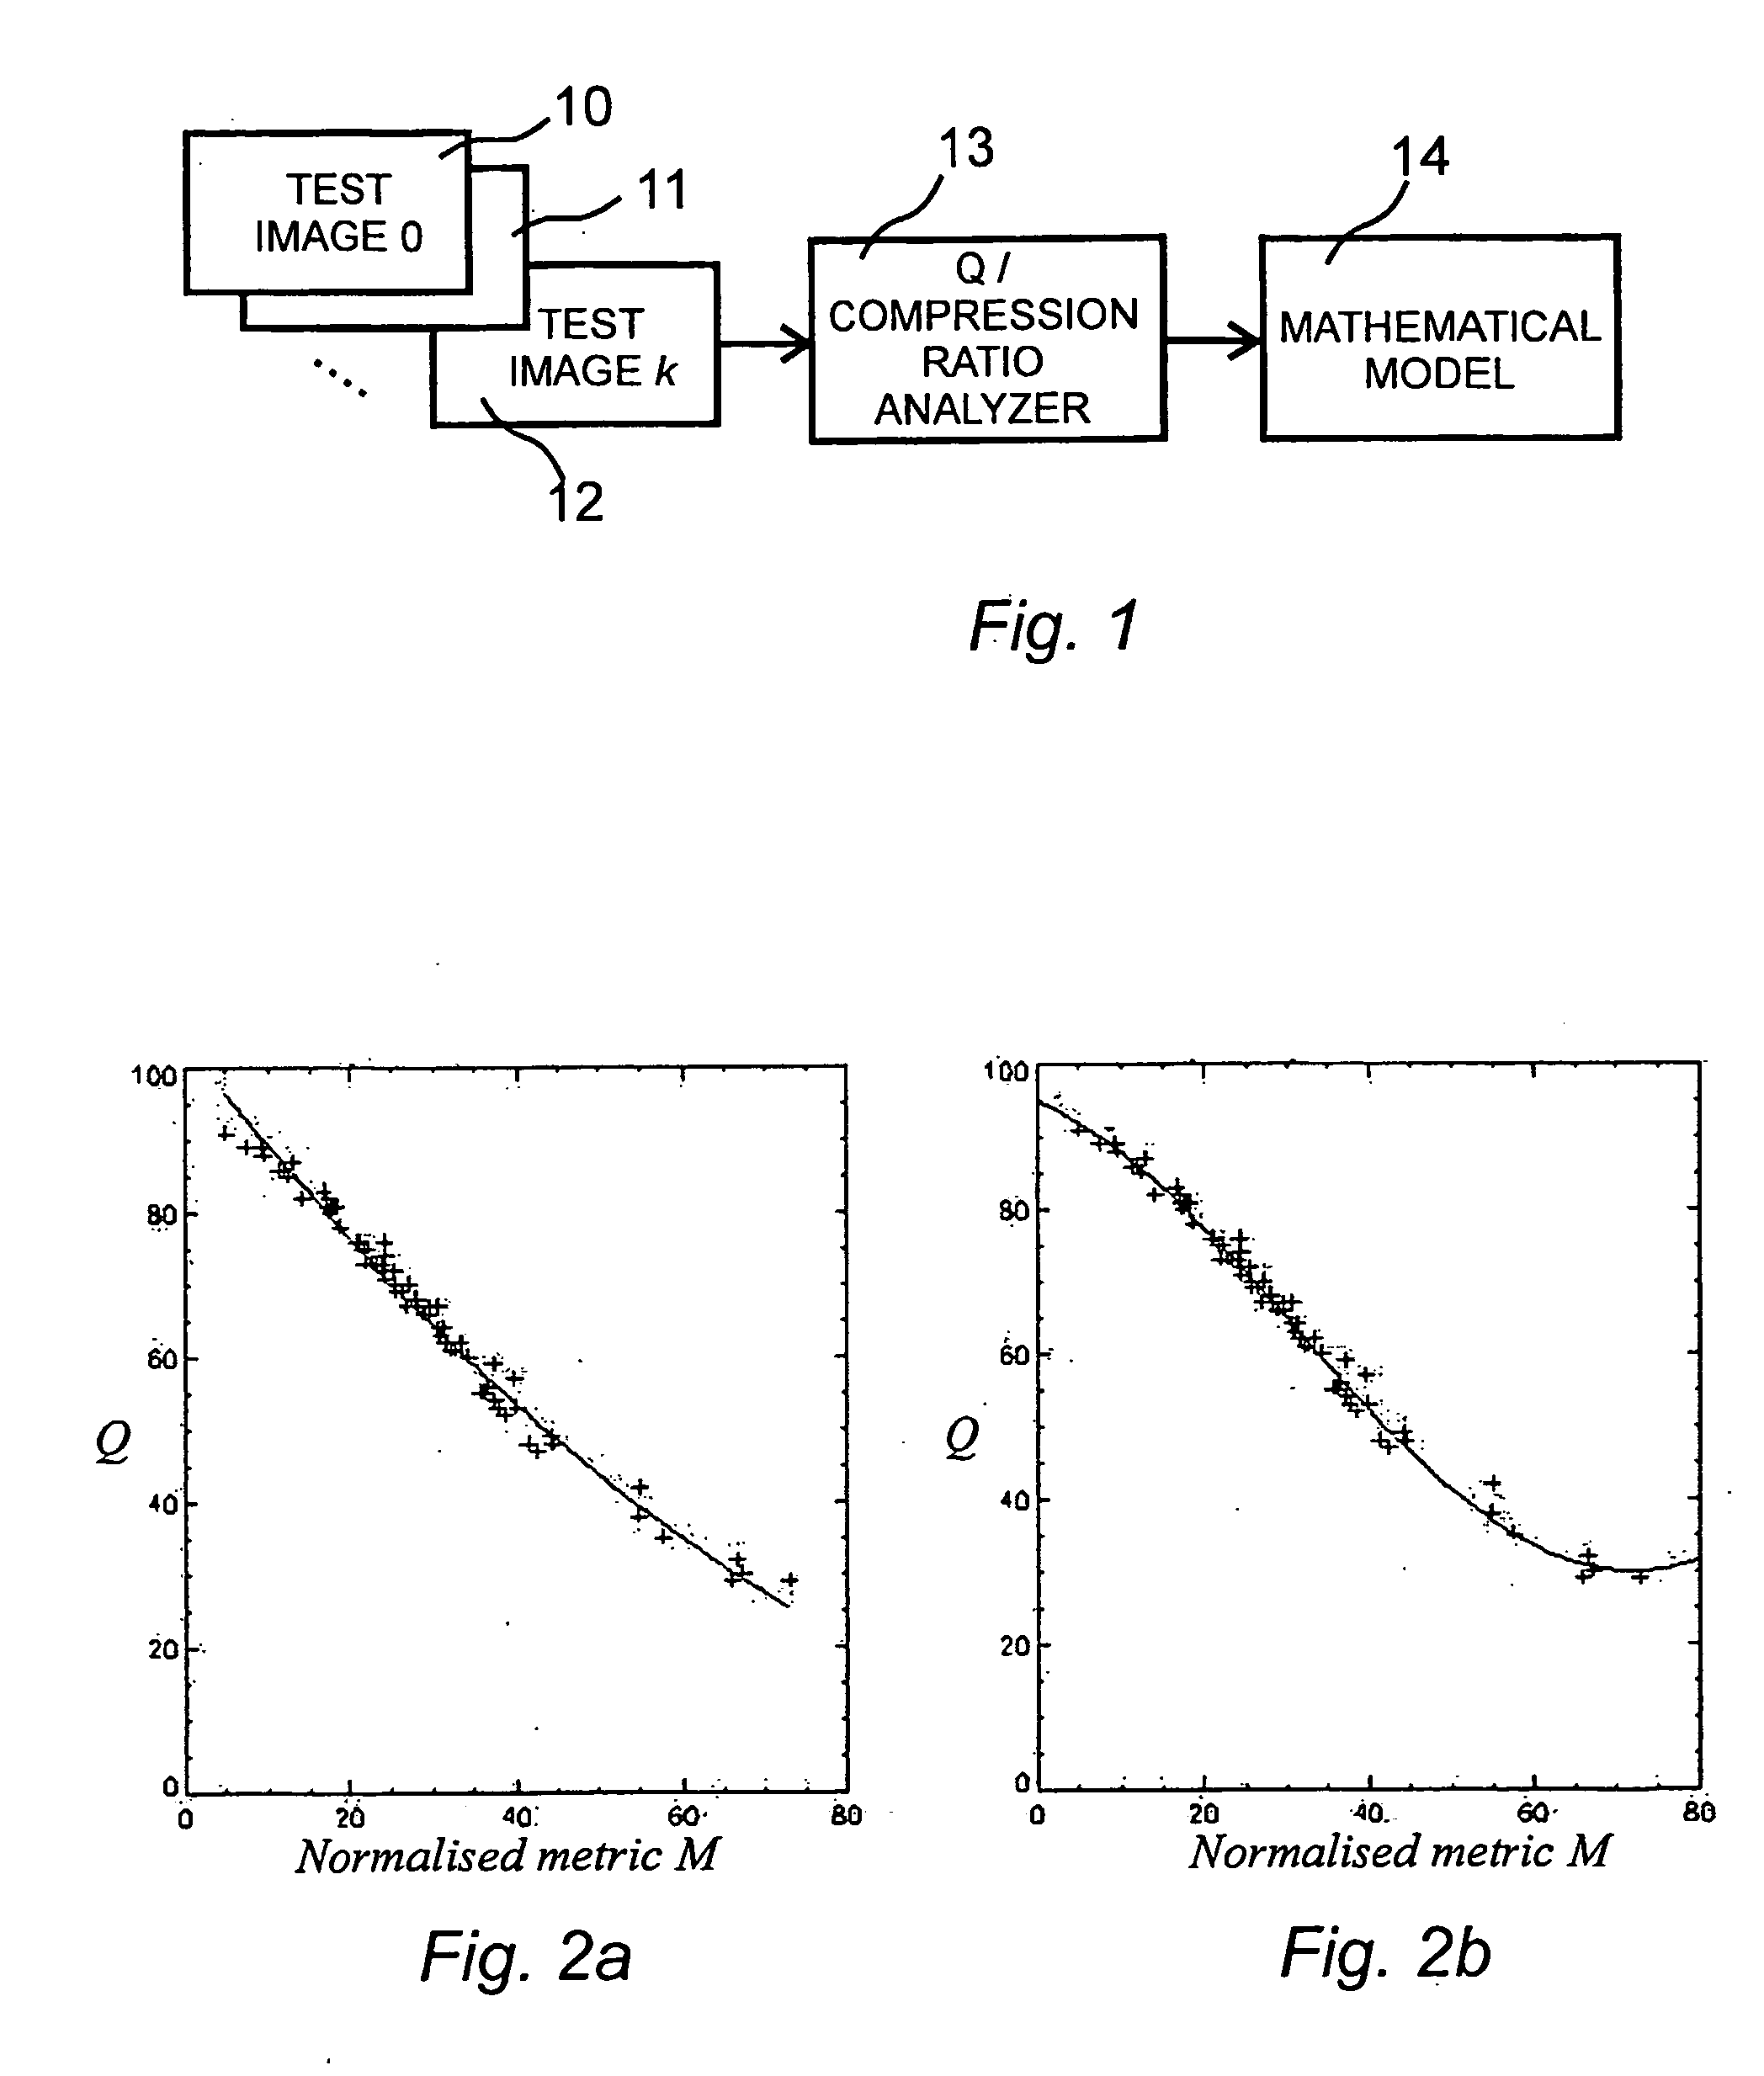 Method for compressing digital images to a predetermined size by calculating an optimal quality factor